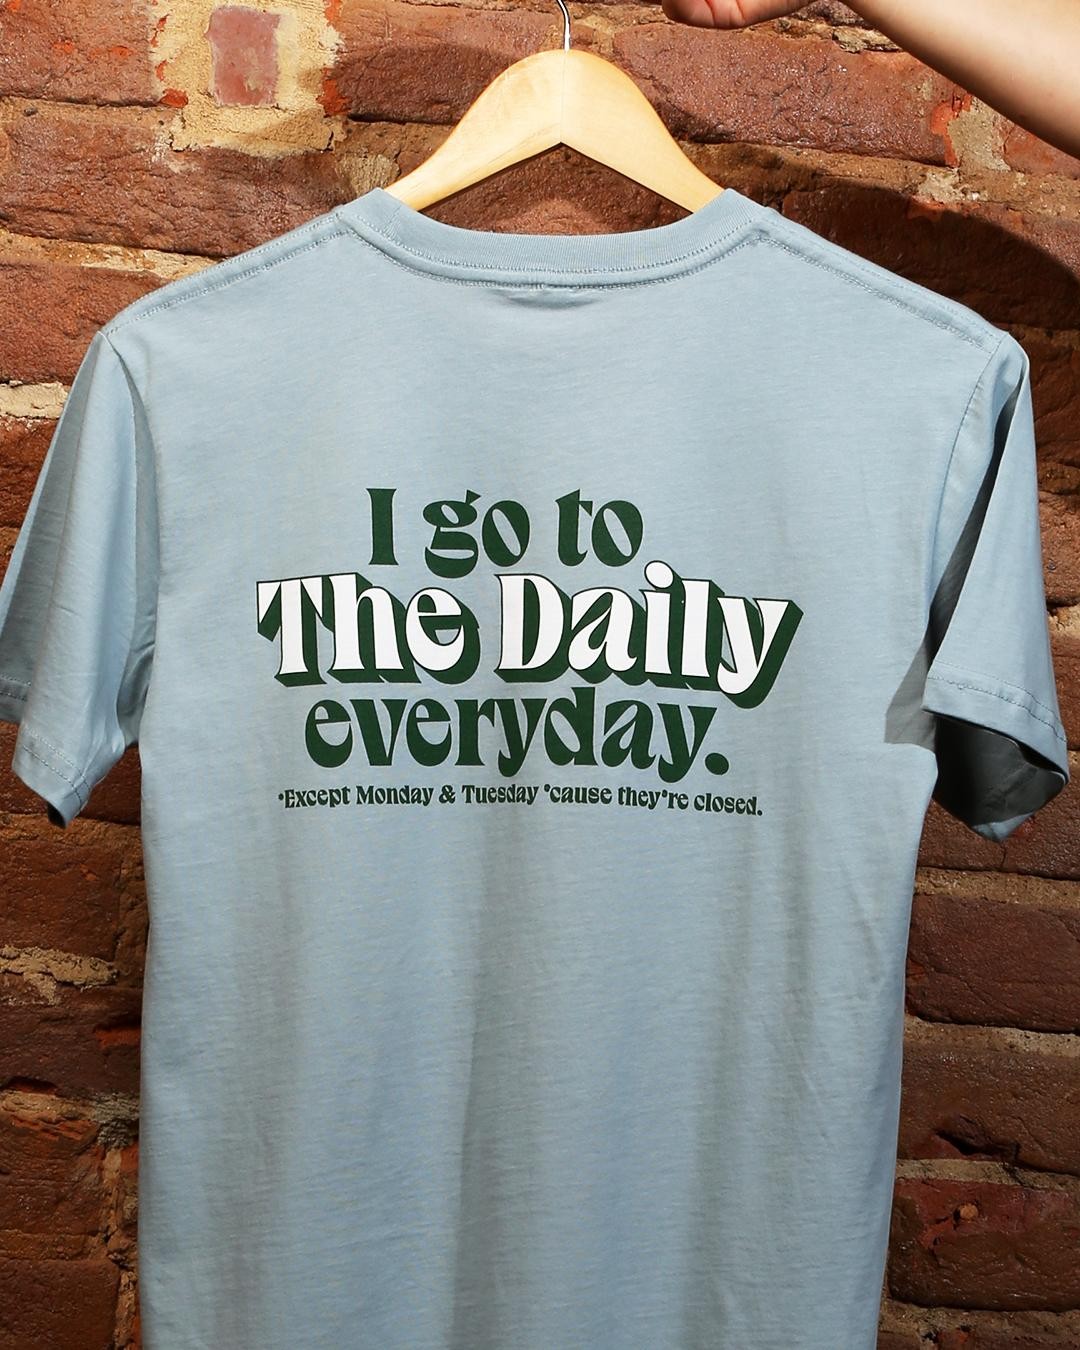 The Daily Everyday Shirt